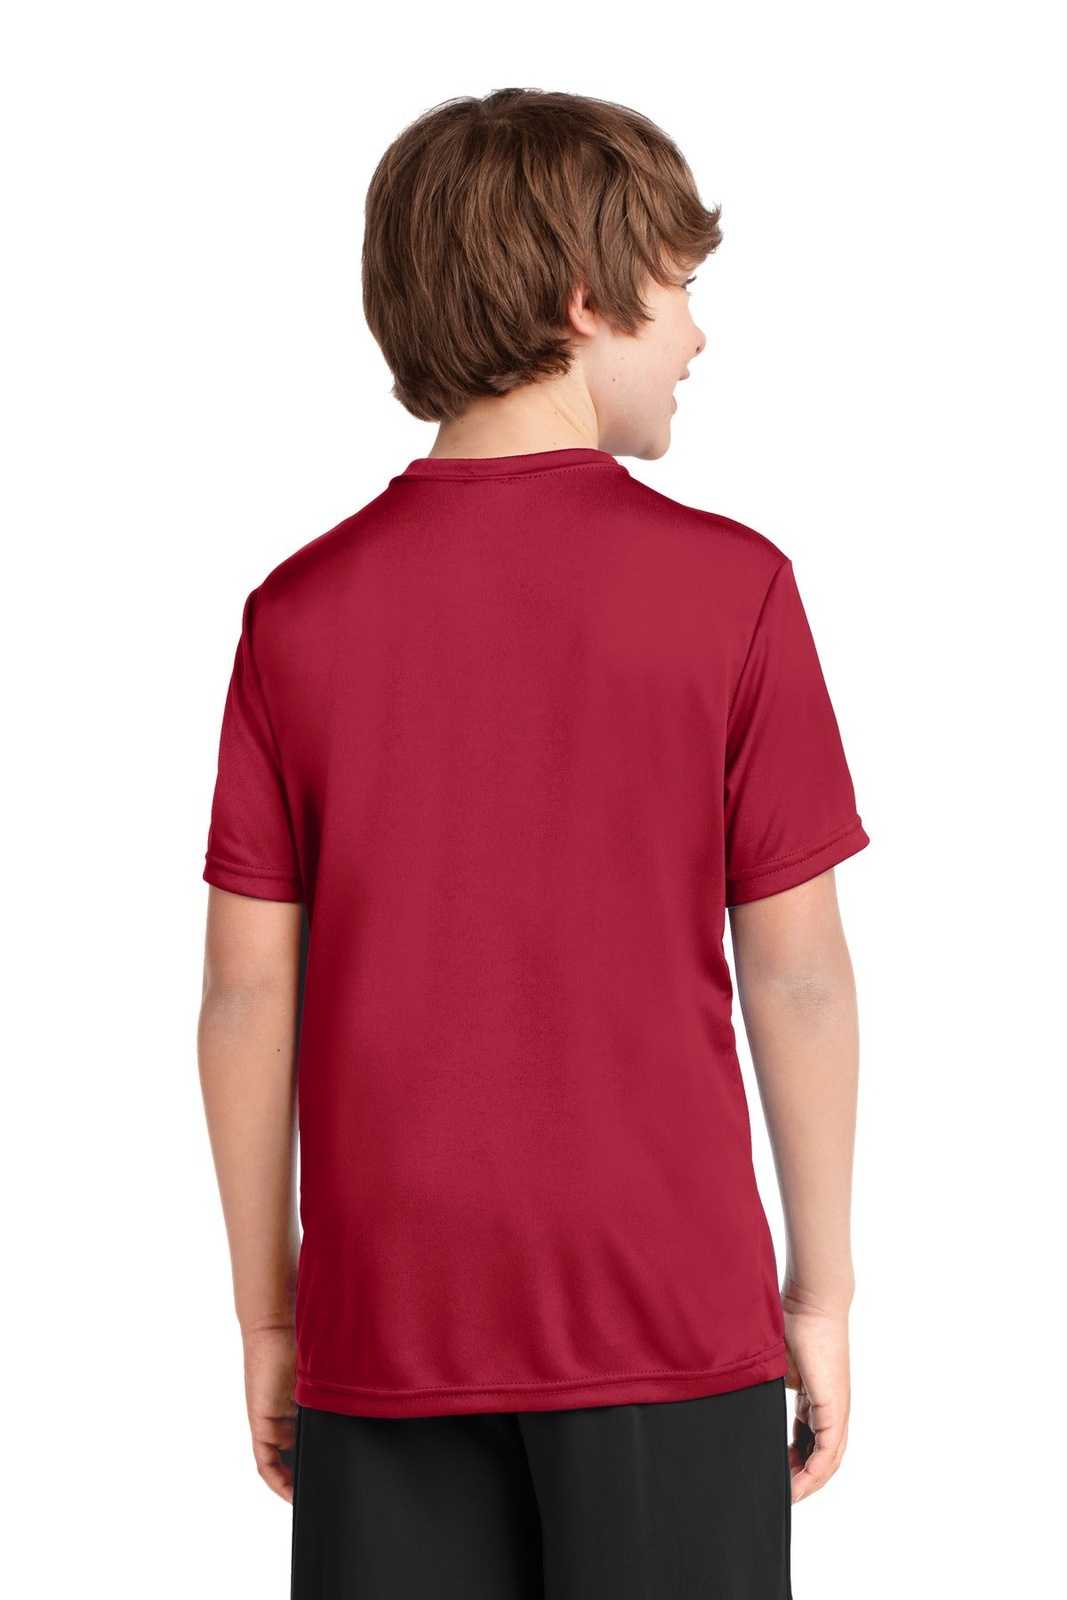 Port &amp; Company PC380Y Youth Performance Tee - Red - HIT a Double - 2